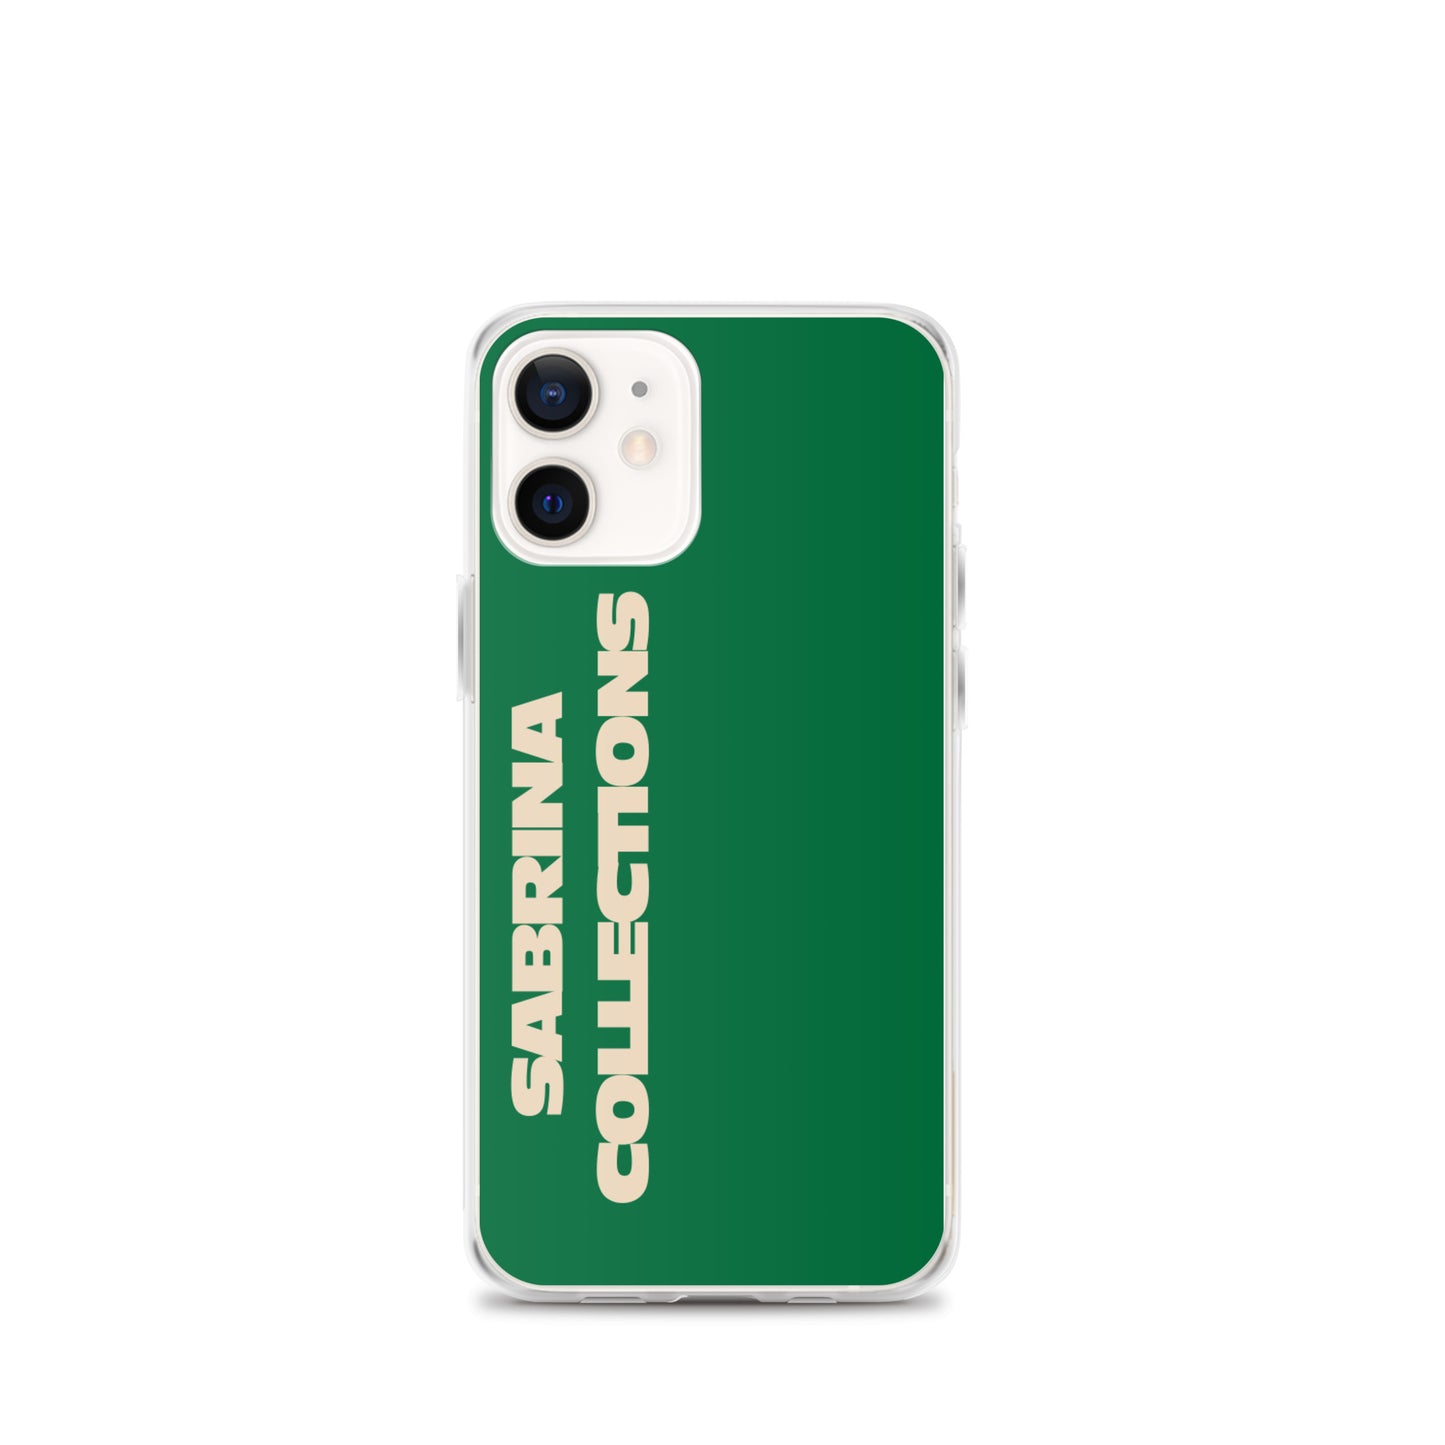 iPhone Case Forest